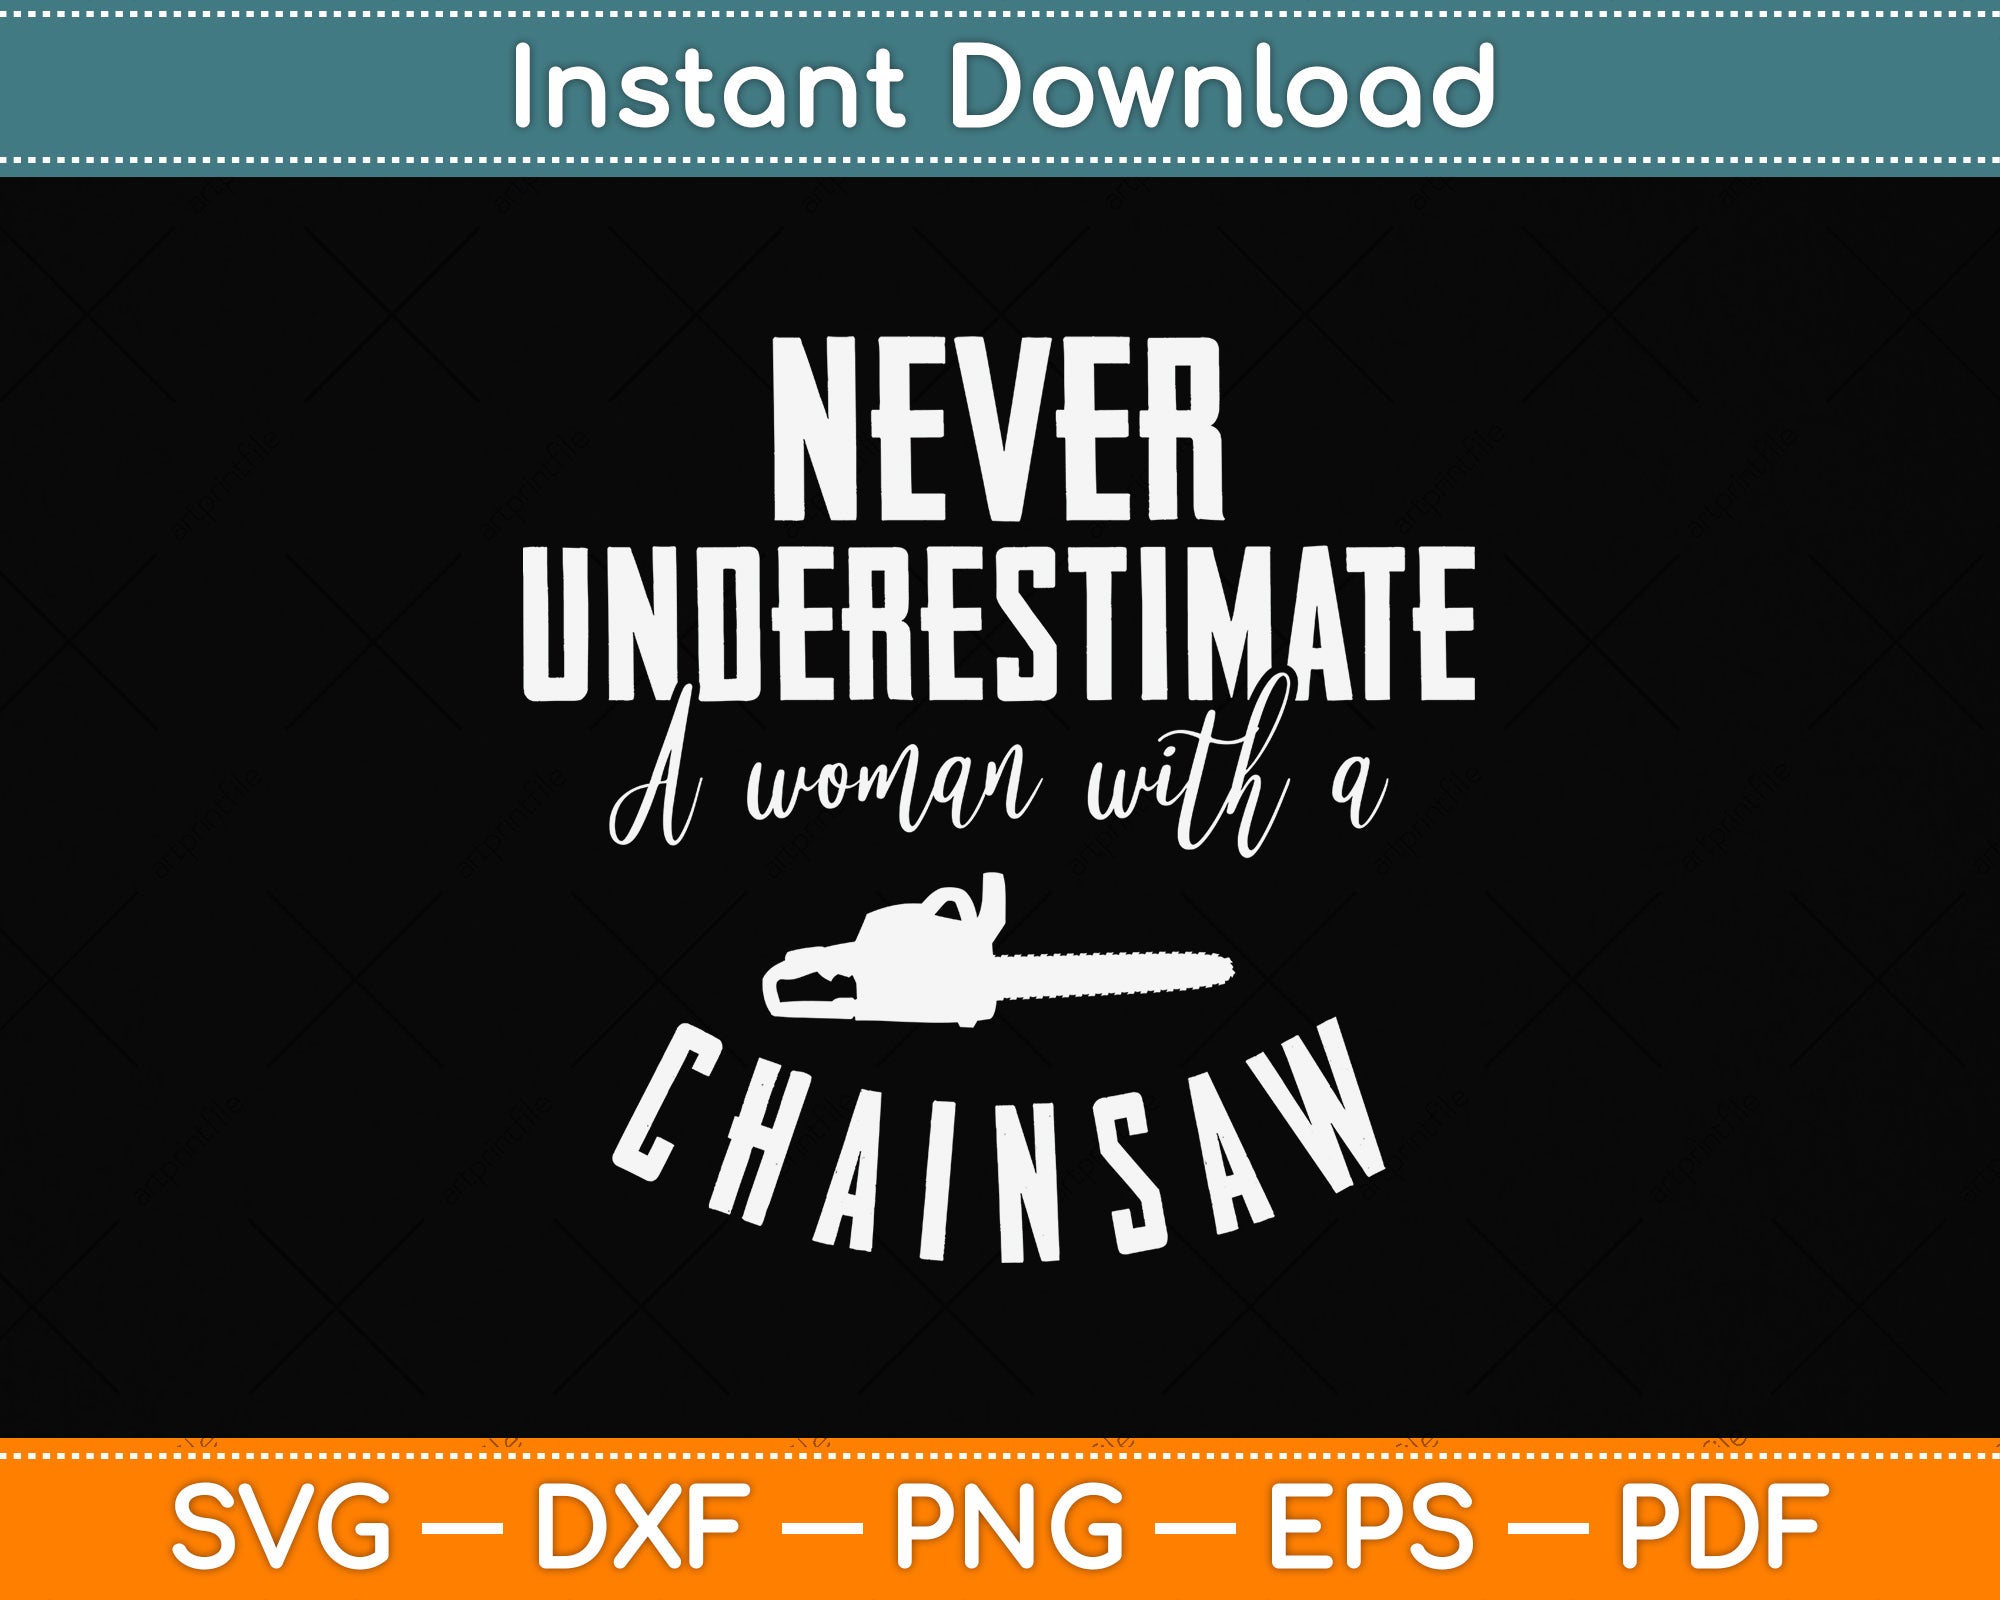 Chainsaw Design SVG PNG DXF EPS PDF